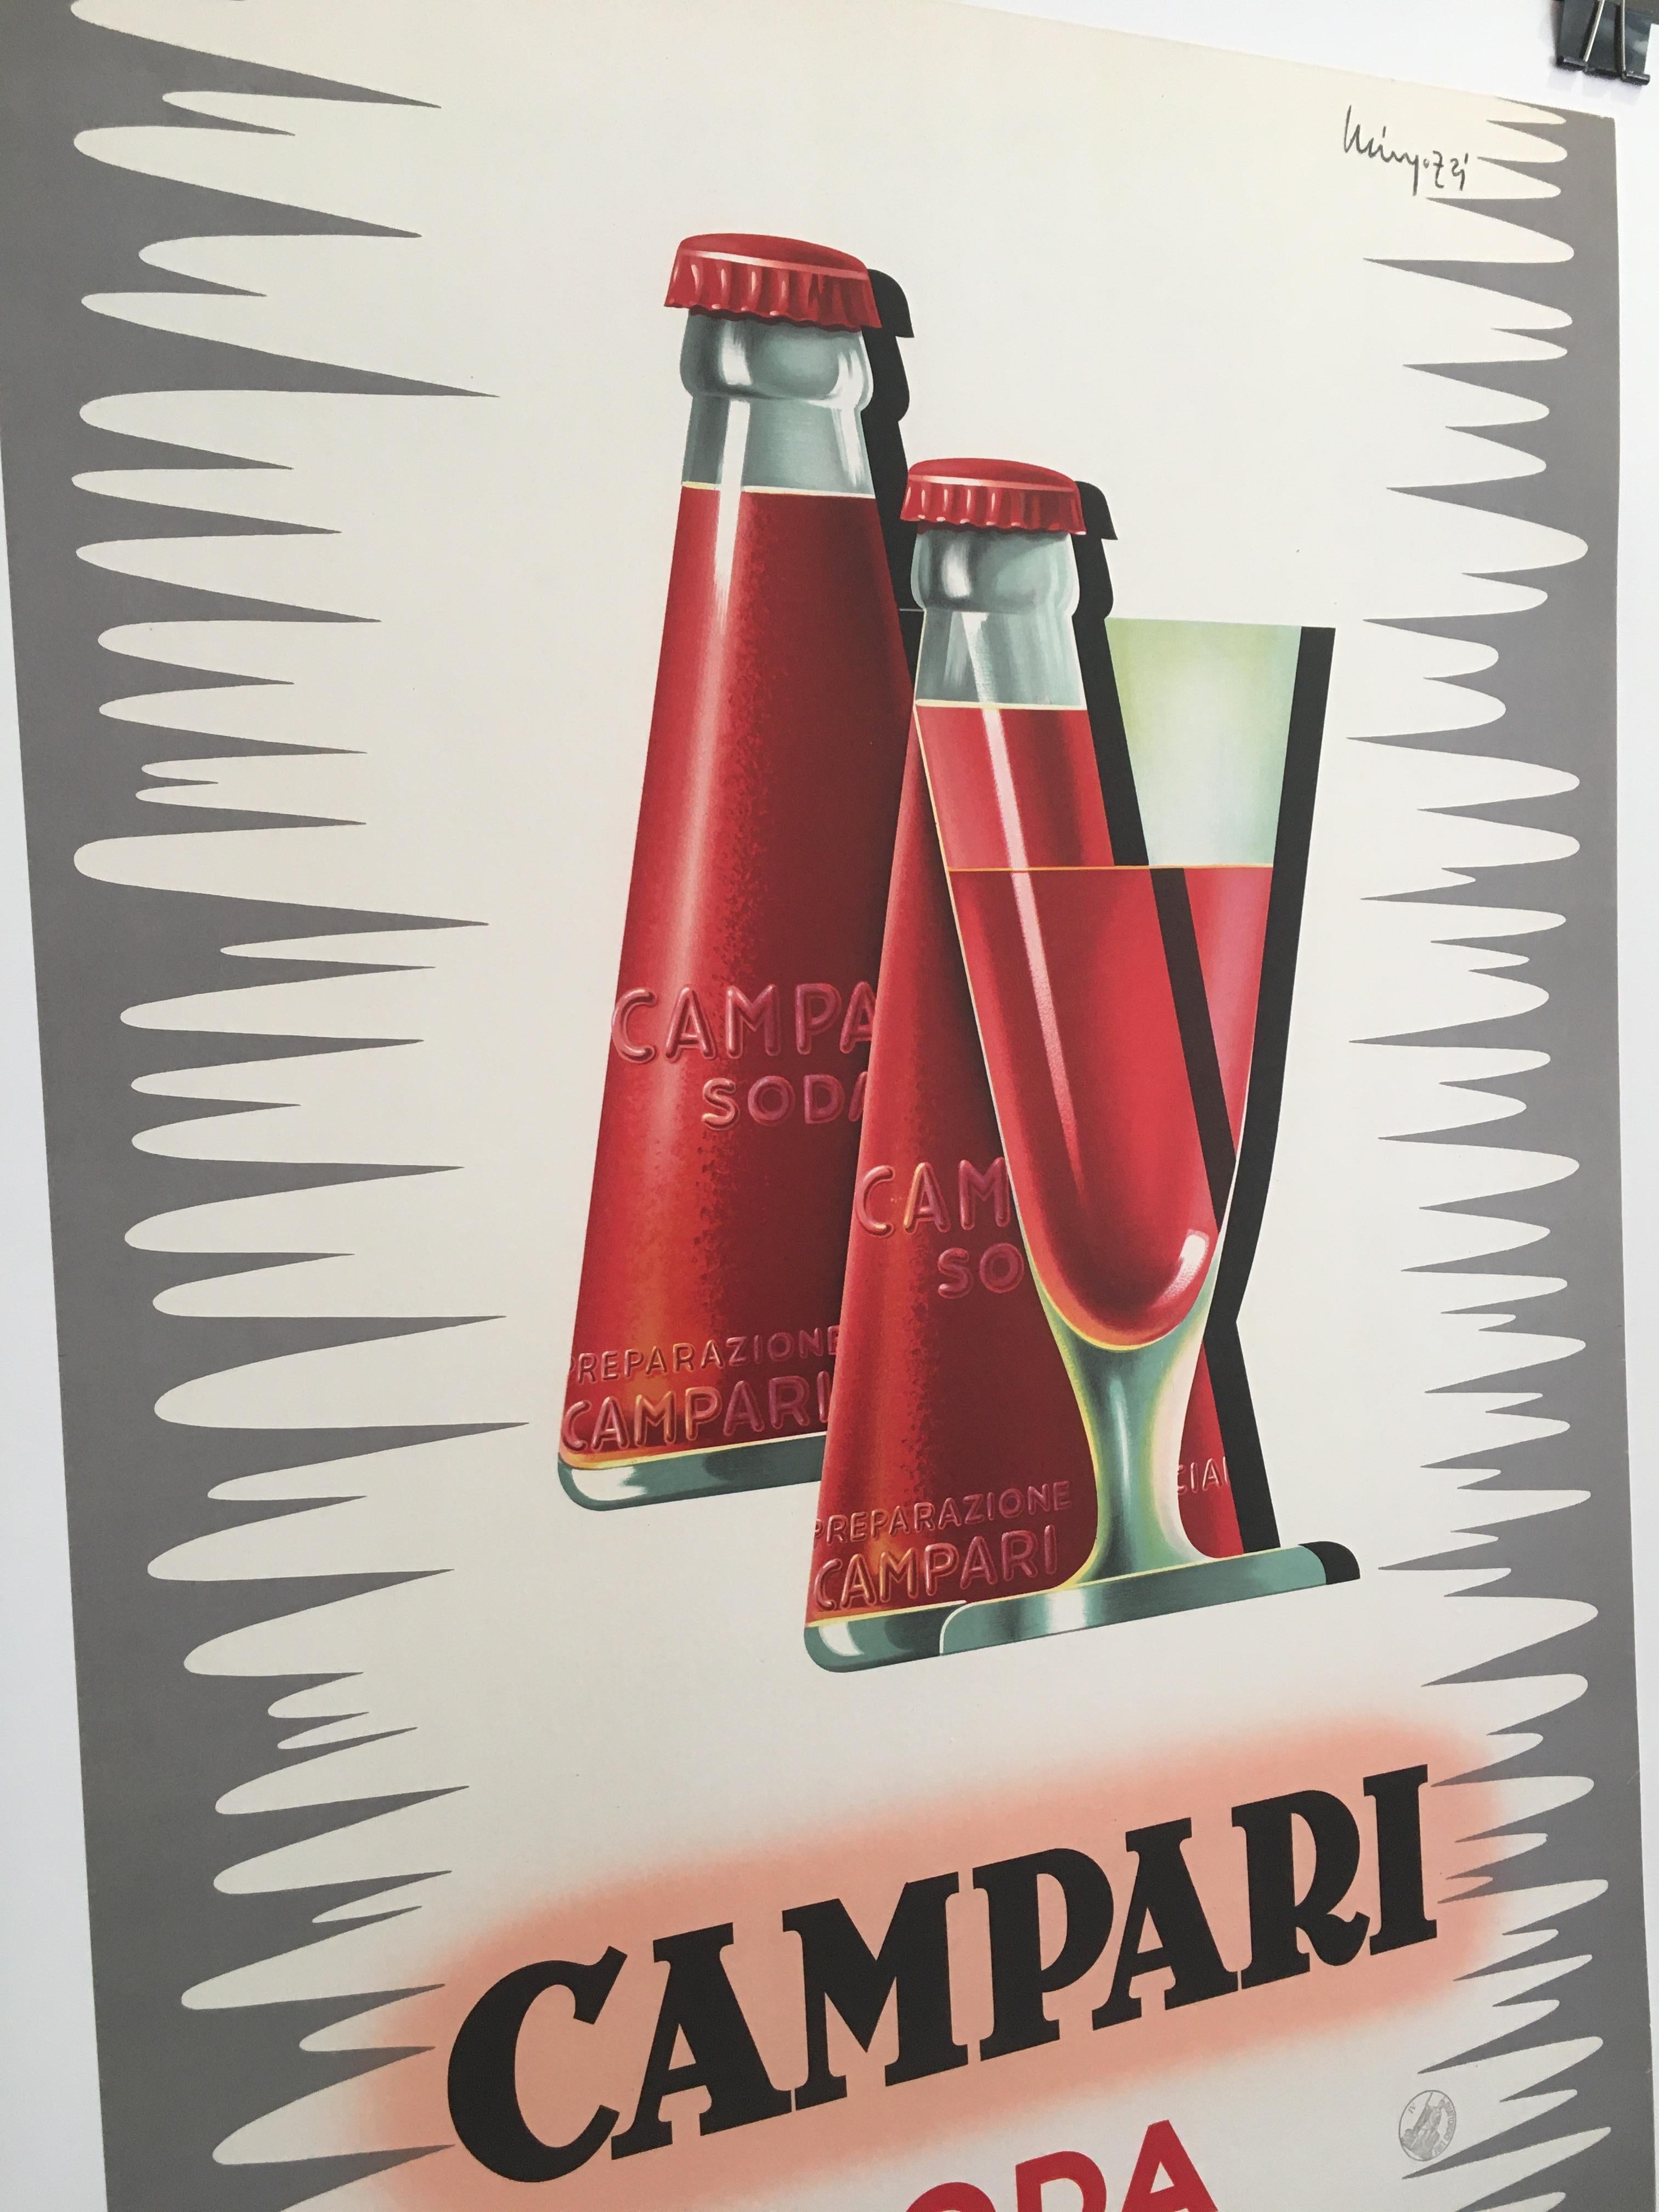 Original vintage midcentury French 'Campari Soda' poster by Mingozzi, 1950

This original vintage lithograph poster epitomises the opulent 1950s era. This poster is in excellent condition and has been linen backed for preservation